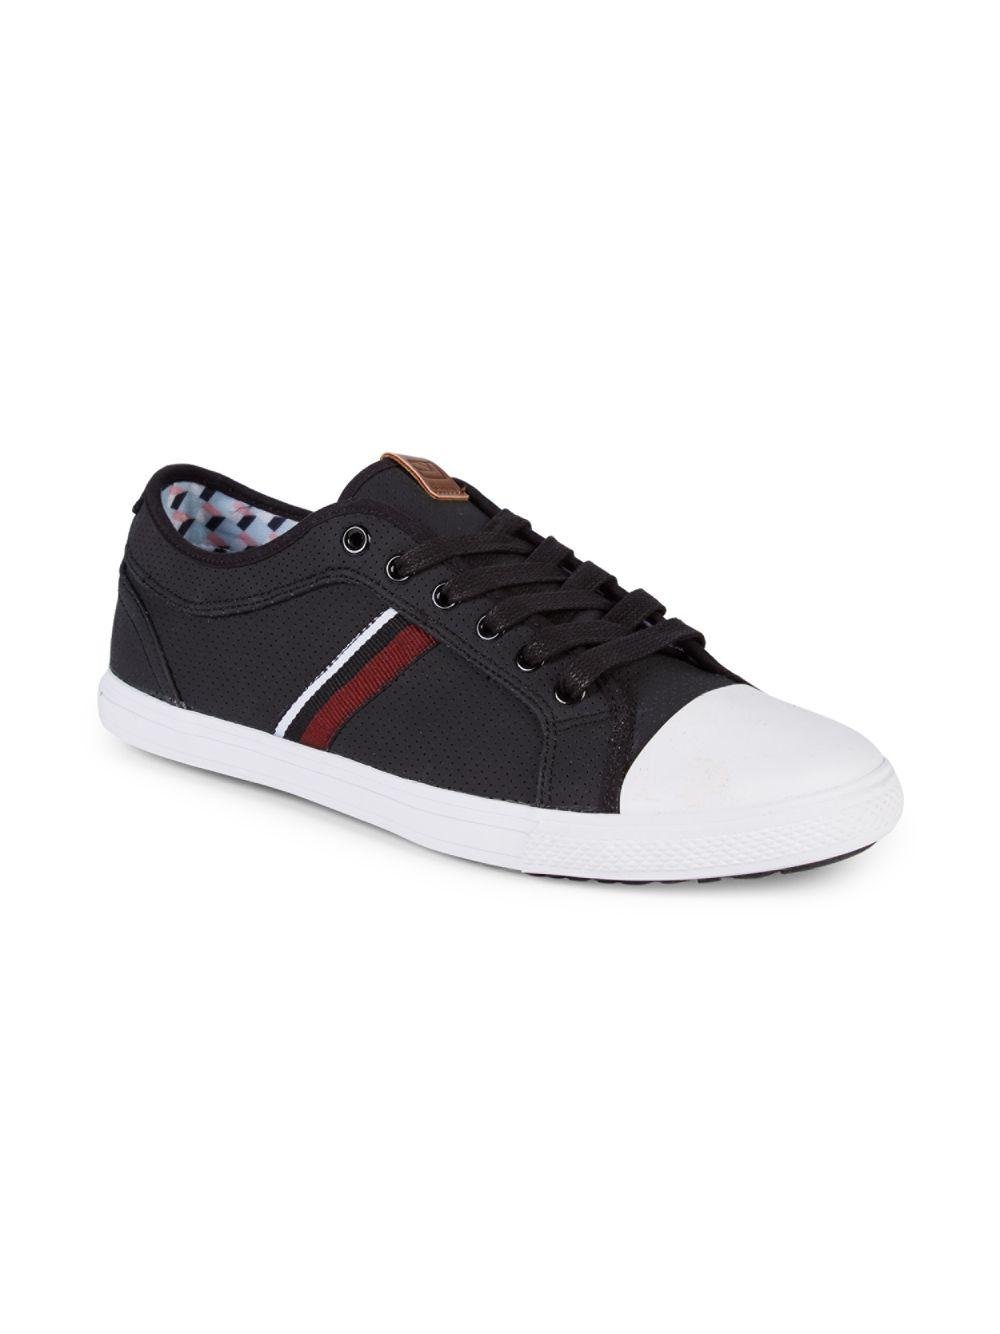 Ben Sherman madison perforated Faux Leather Sneaker